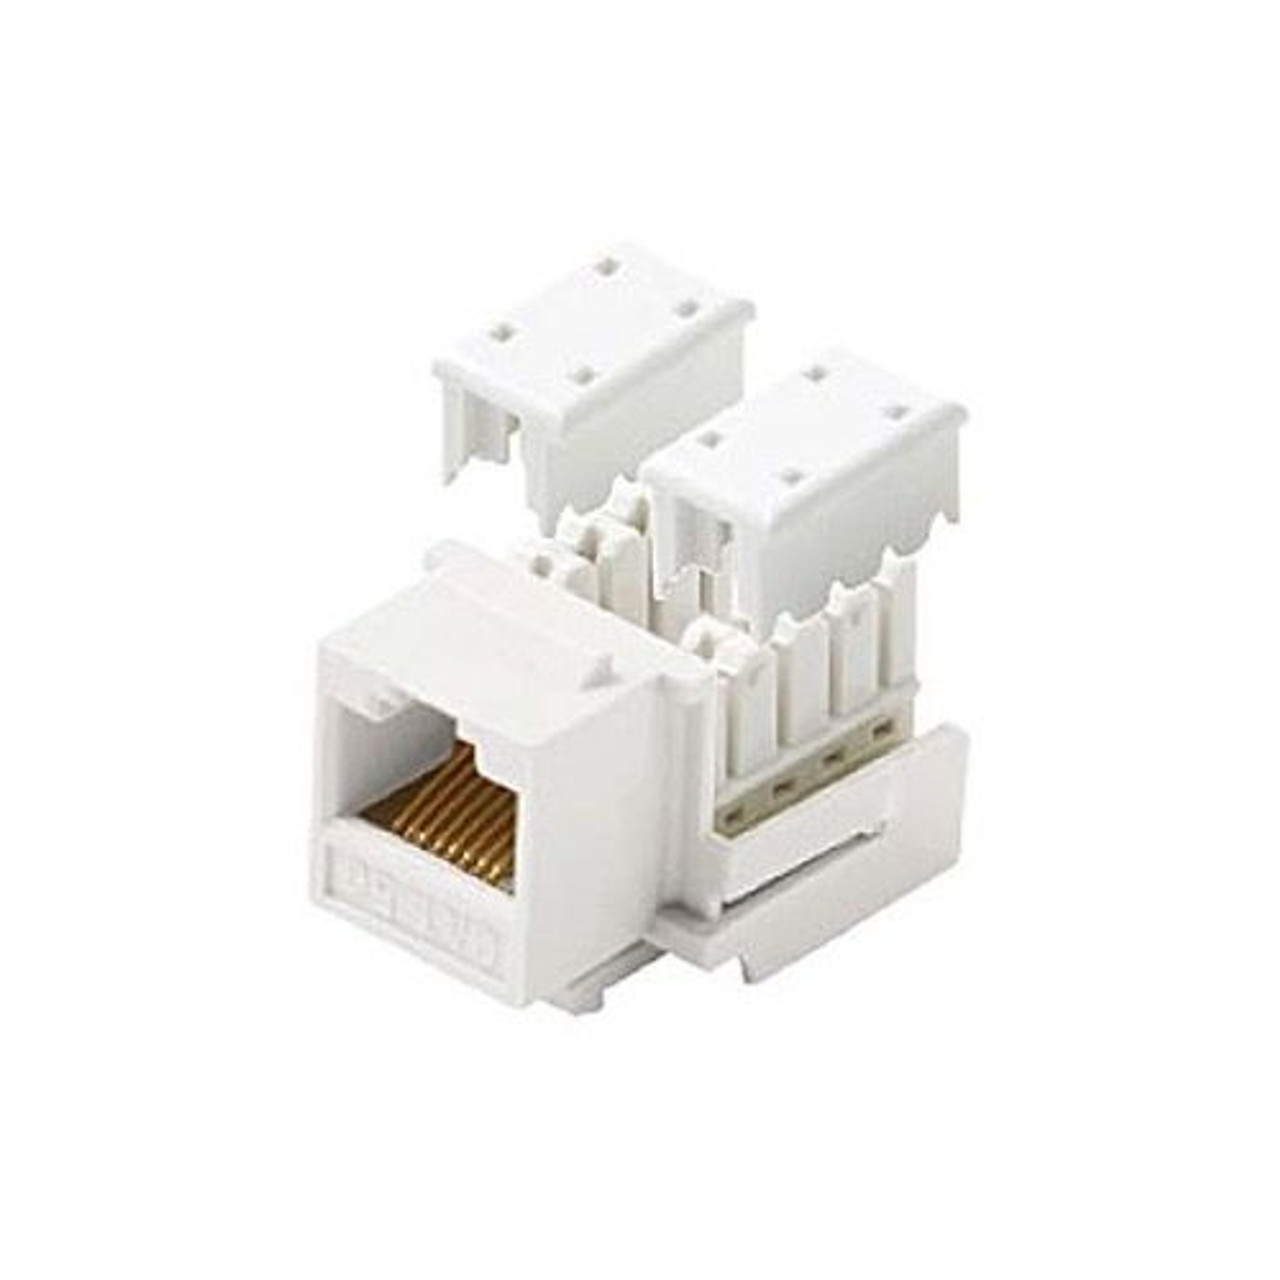 Steren 310-120WH CAT5e RJ45 Keystone Insert Jack 90 Degree White Modular Ethernet RJ-45 Connector Network 8P8C 8 Wire Twisted Pair QuickPort Telephone Wall Plate Snap-In Insert Data Telecom